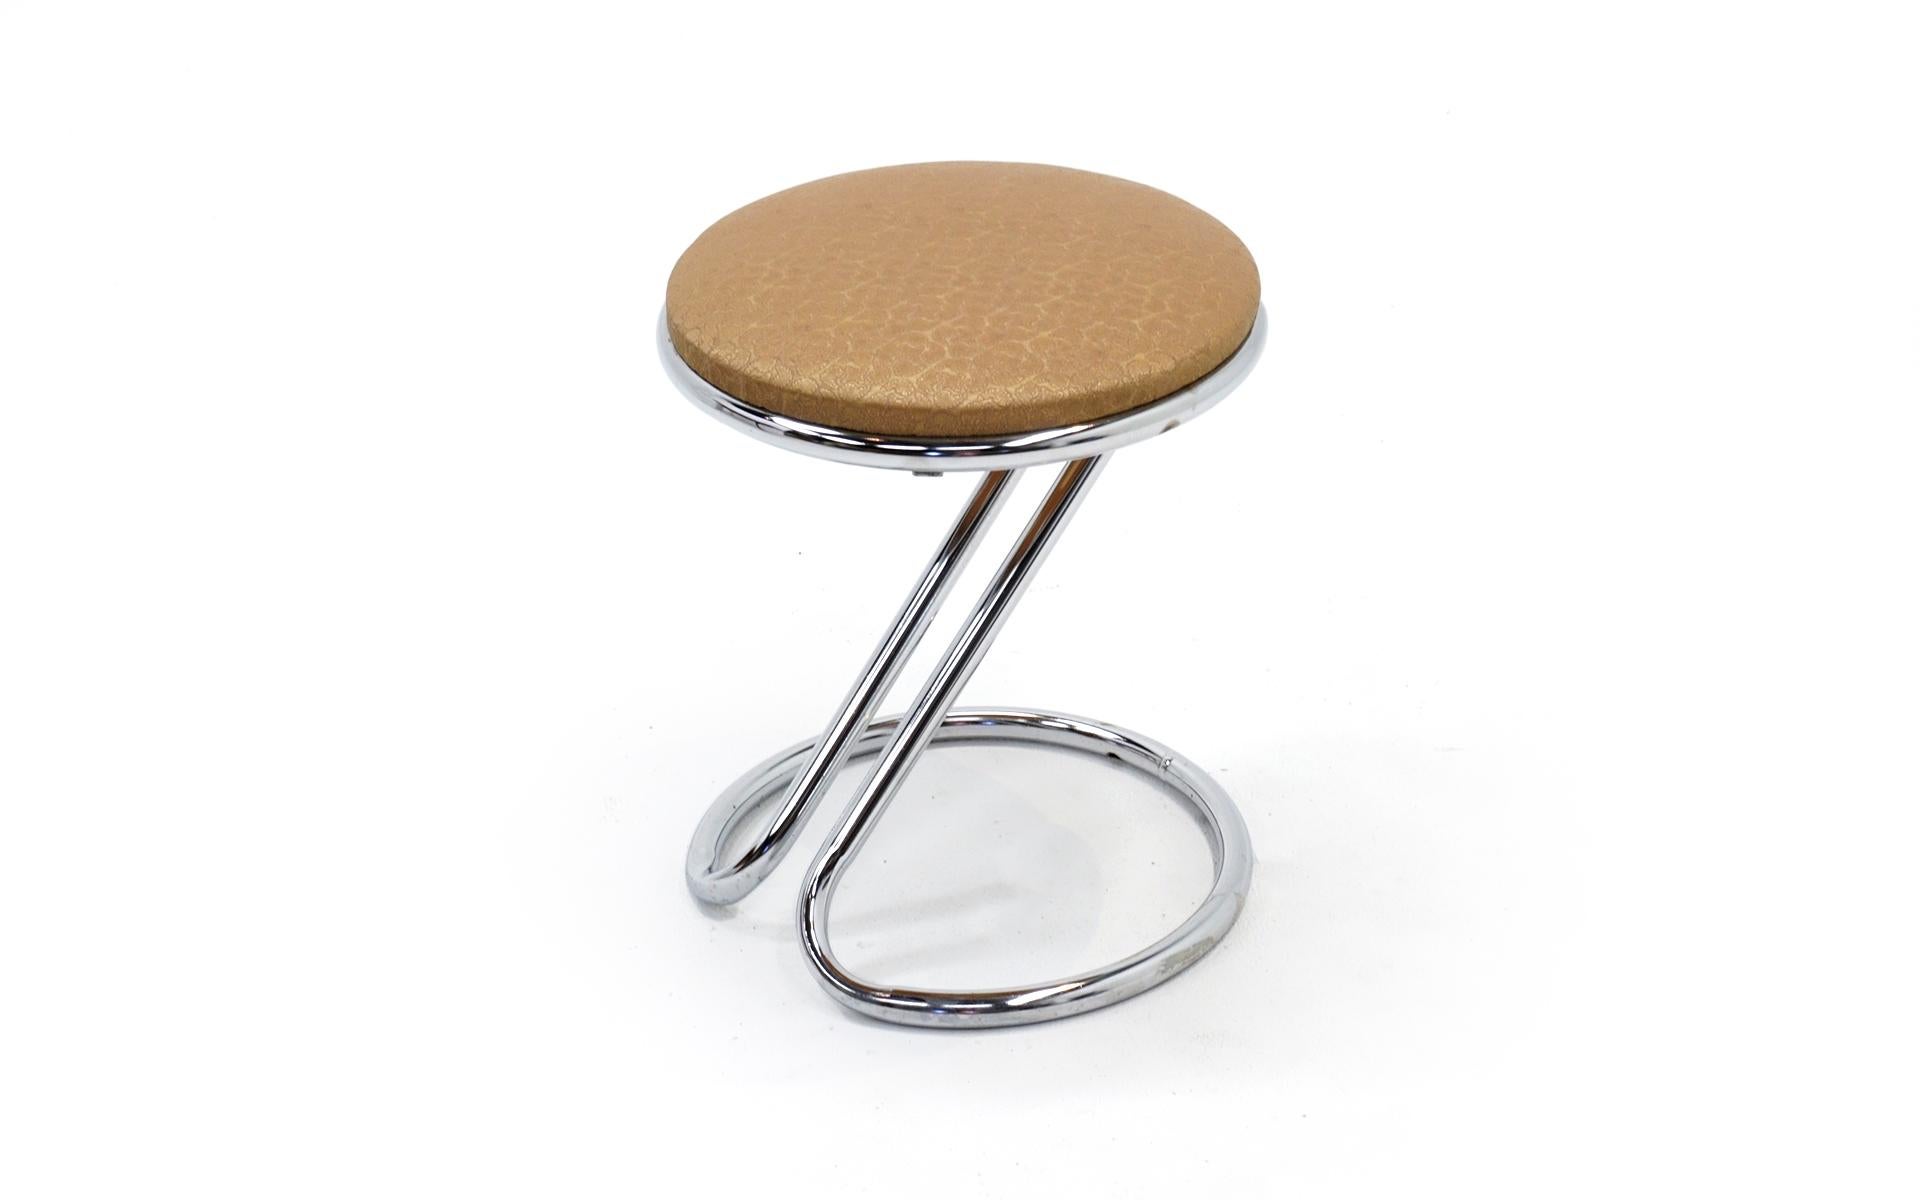 Rare short work stool or vanity stool designed by Gilbert Rohde and made by Troy Sunshade Company. The chrome and upholstery are both in very good to excellent condition. Retains the original Troy Sunshade label on the underside of the seat.